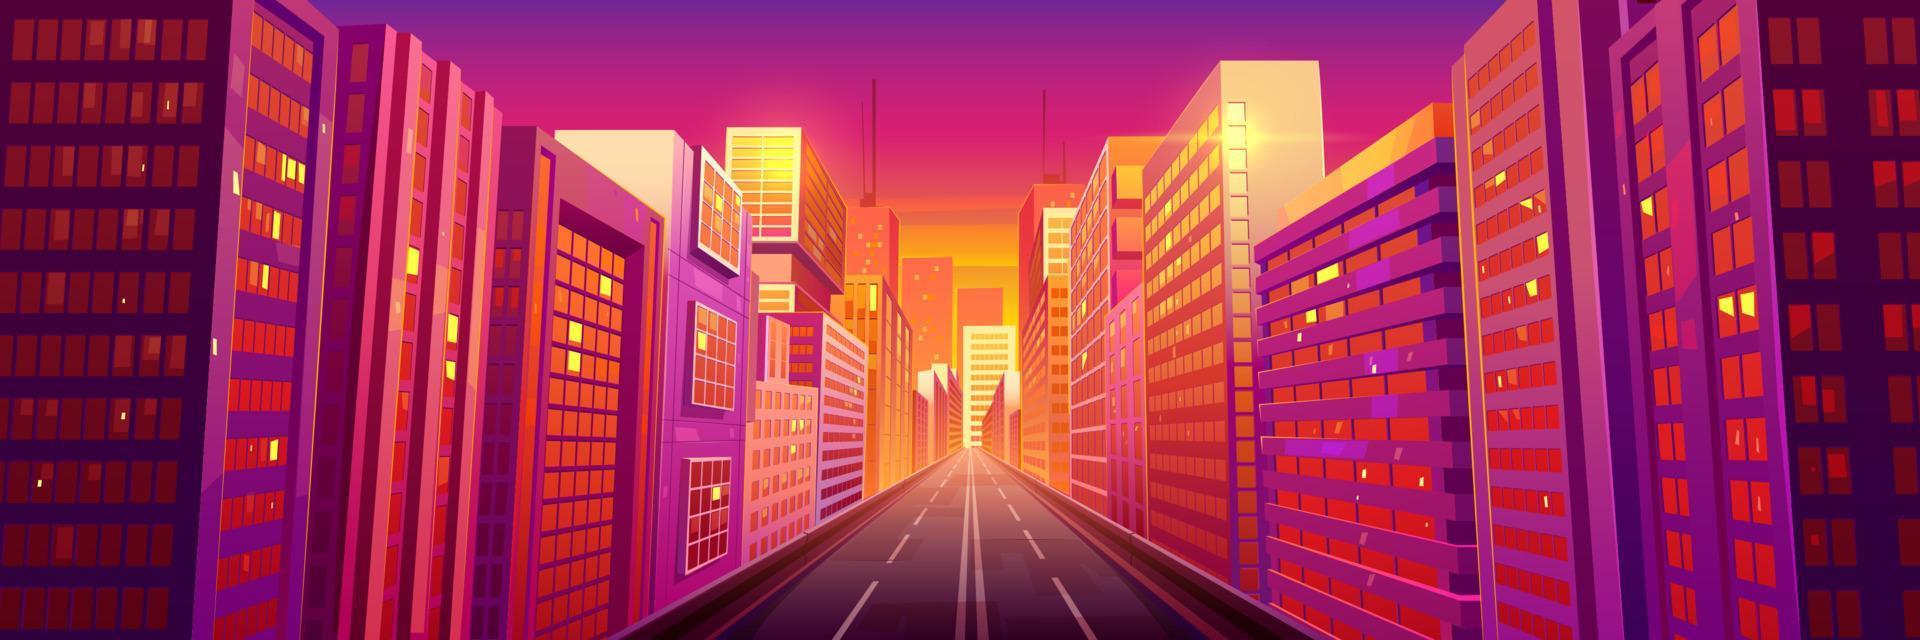 City street with road at early morning, driveway vector